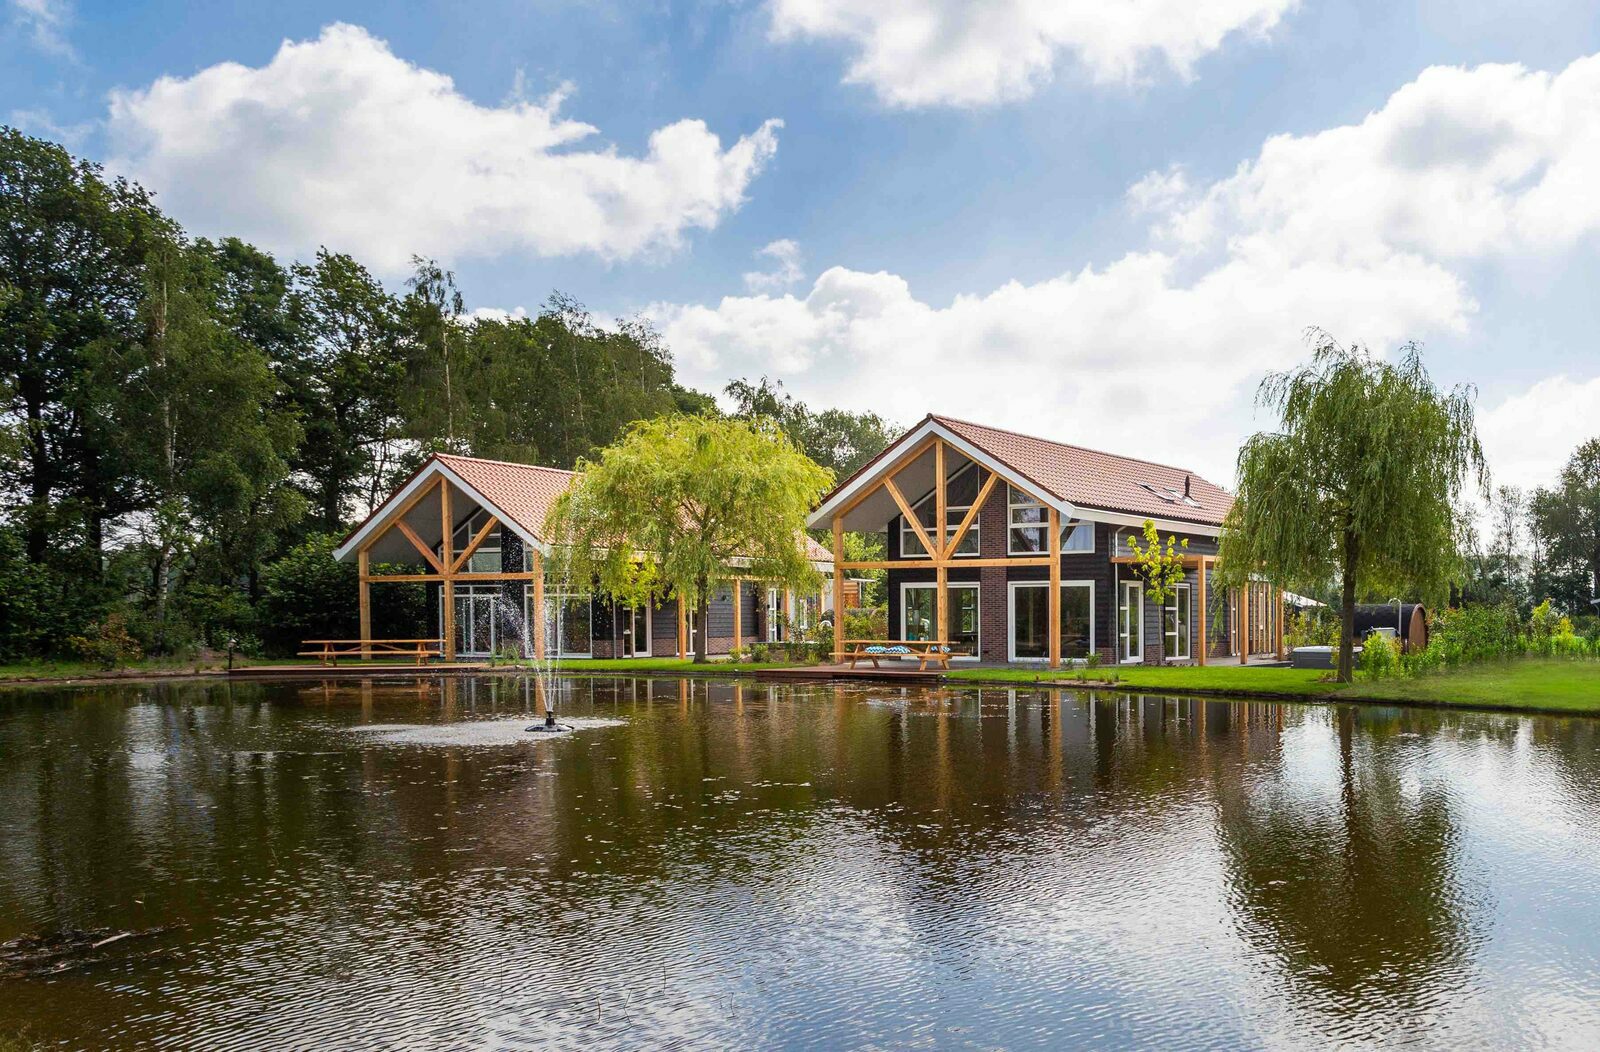 Group accommodation in the Netherlands